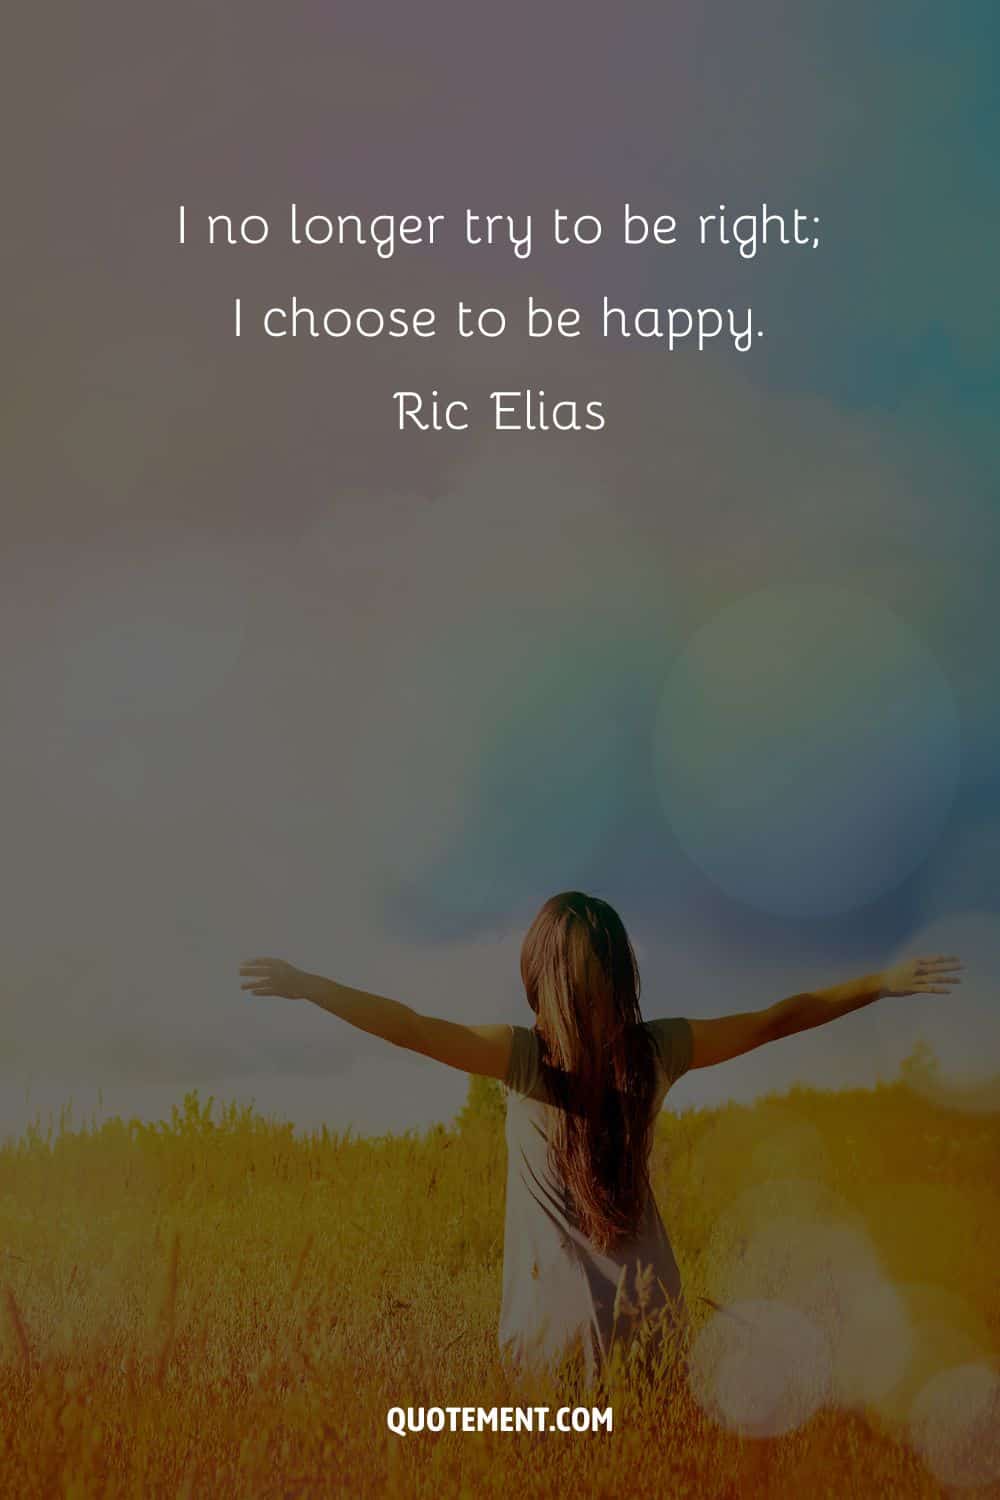 I no longer try to be right; I choose to be happy. – Ric Elias.